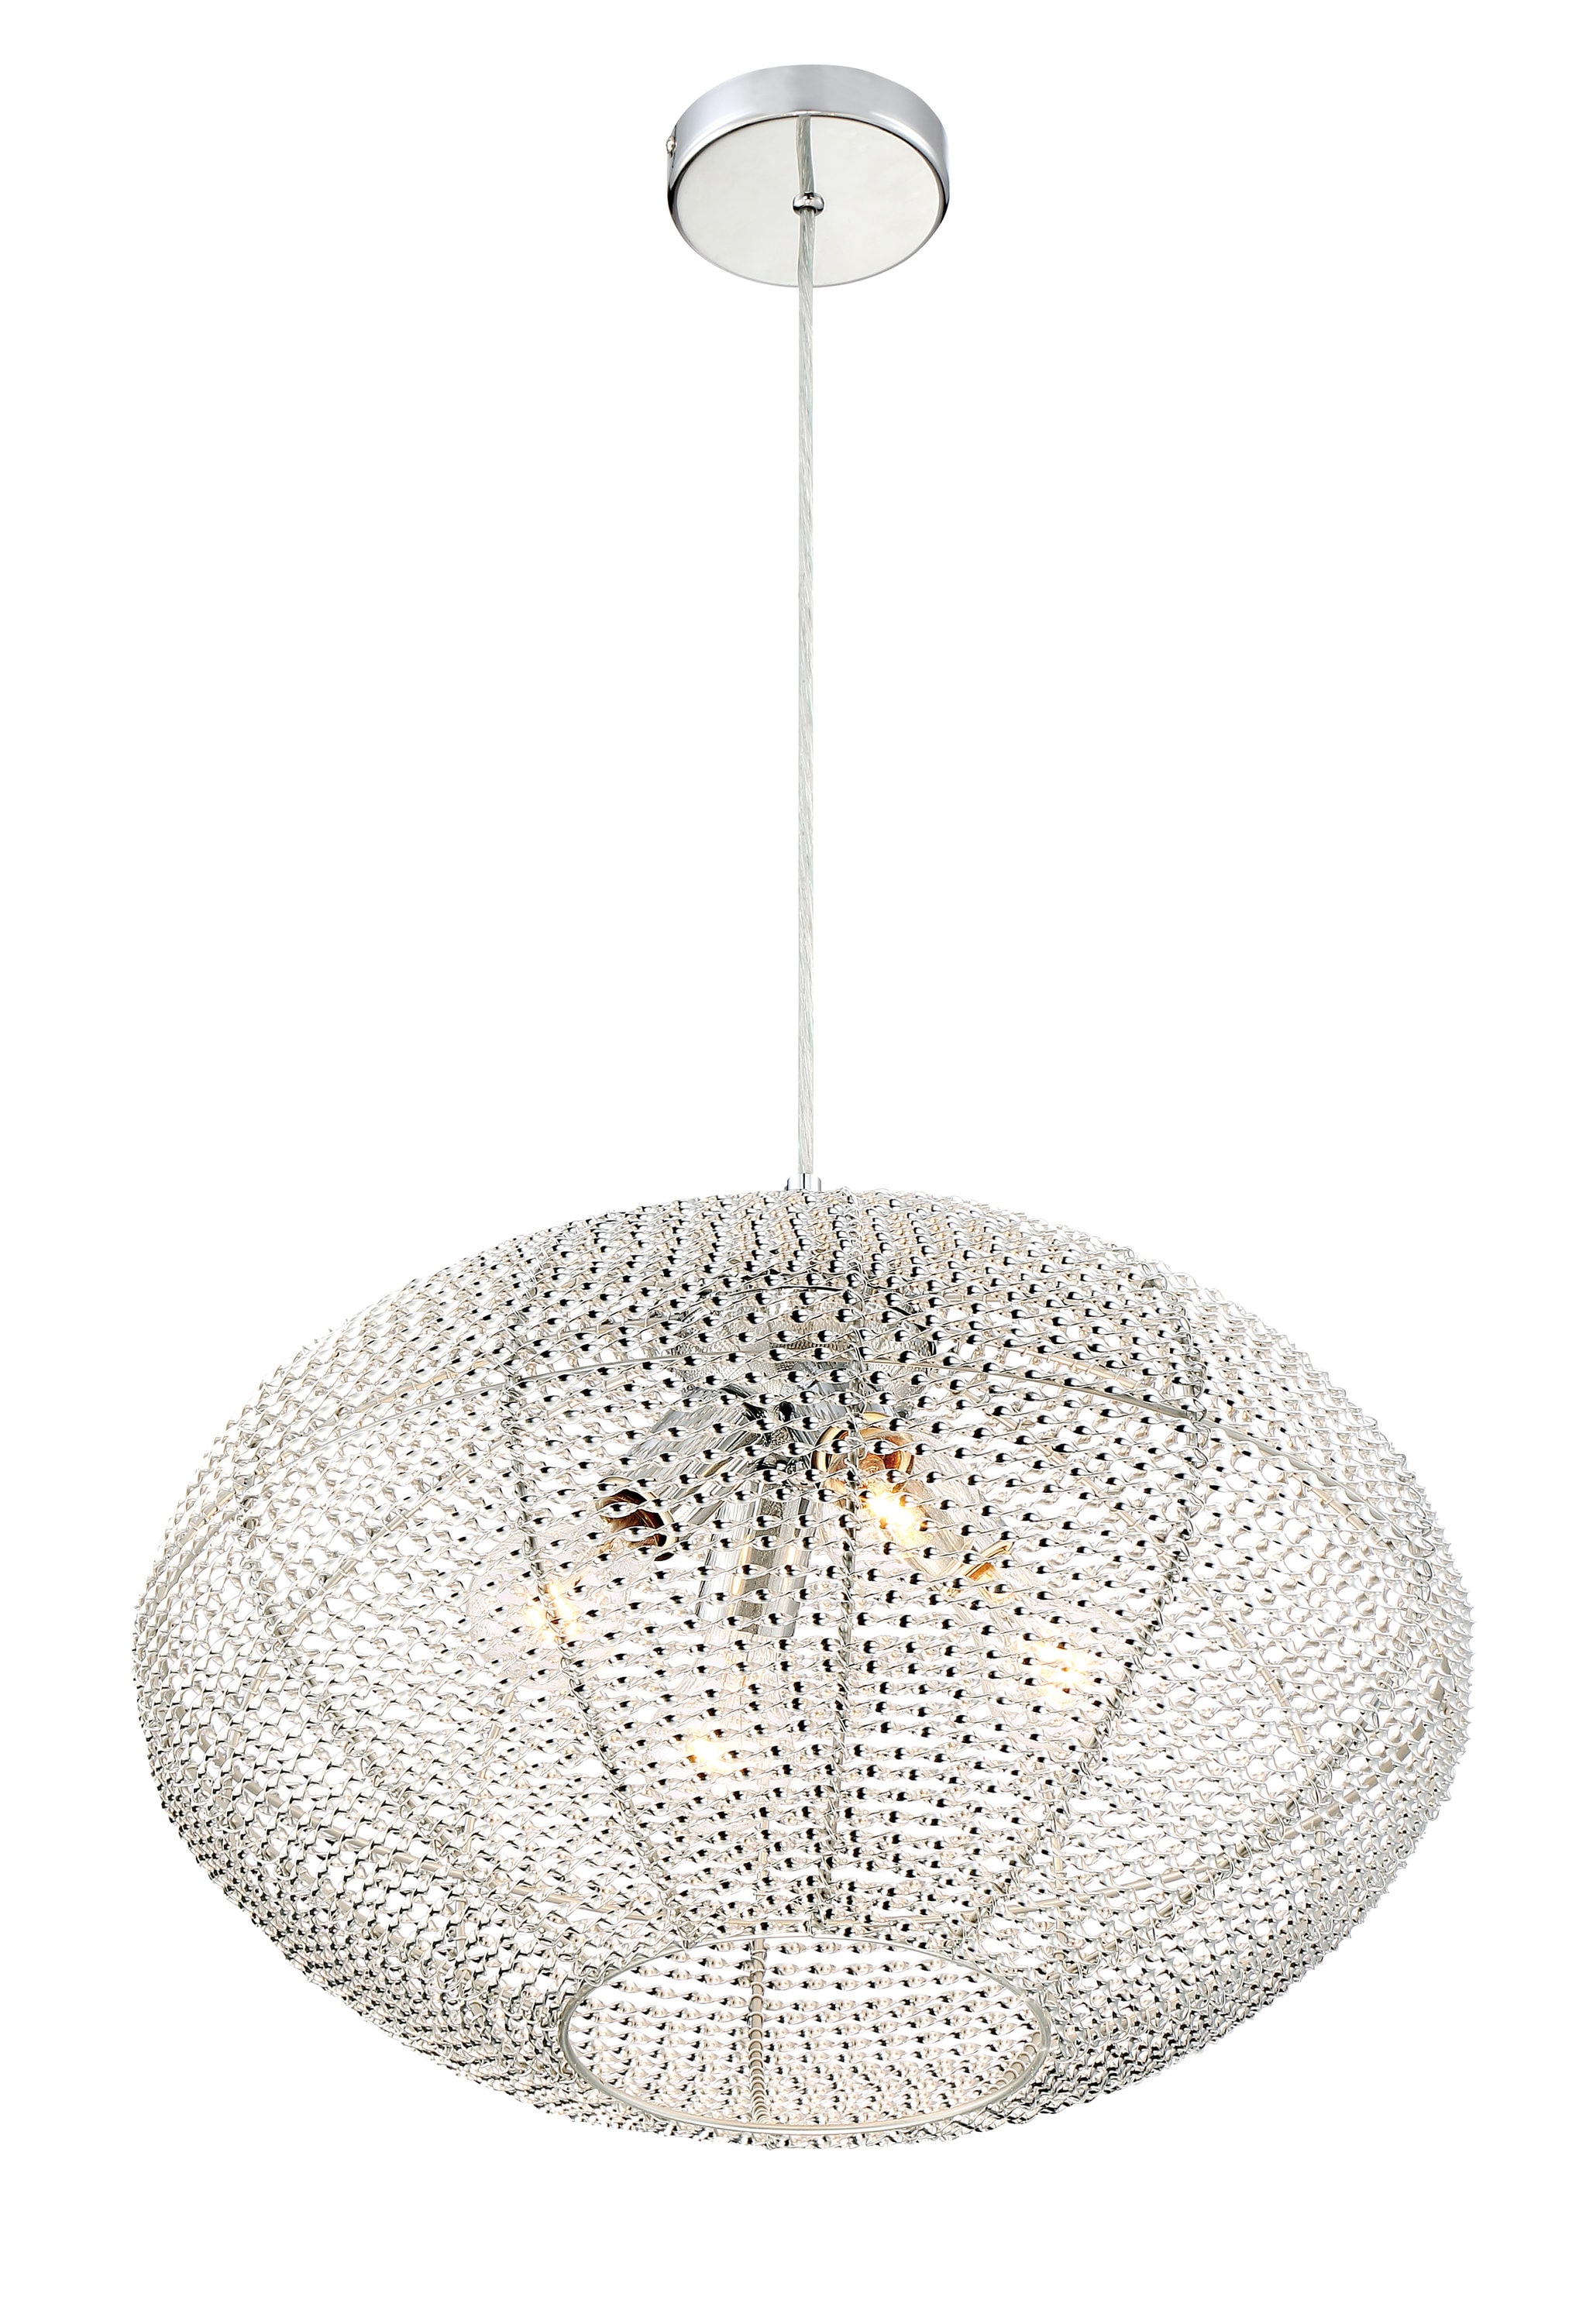 Transitional Lighting at department Hanging Chrome Quoizel Dome Tango Pendant Polished in the Pendant 4-Light Light